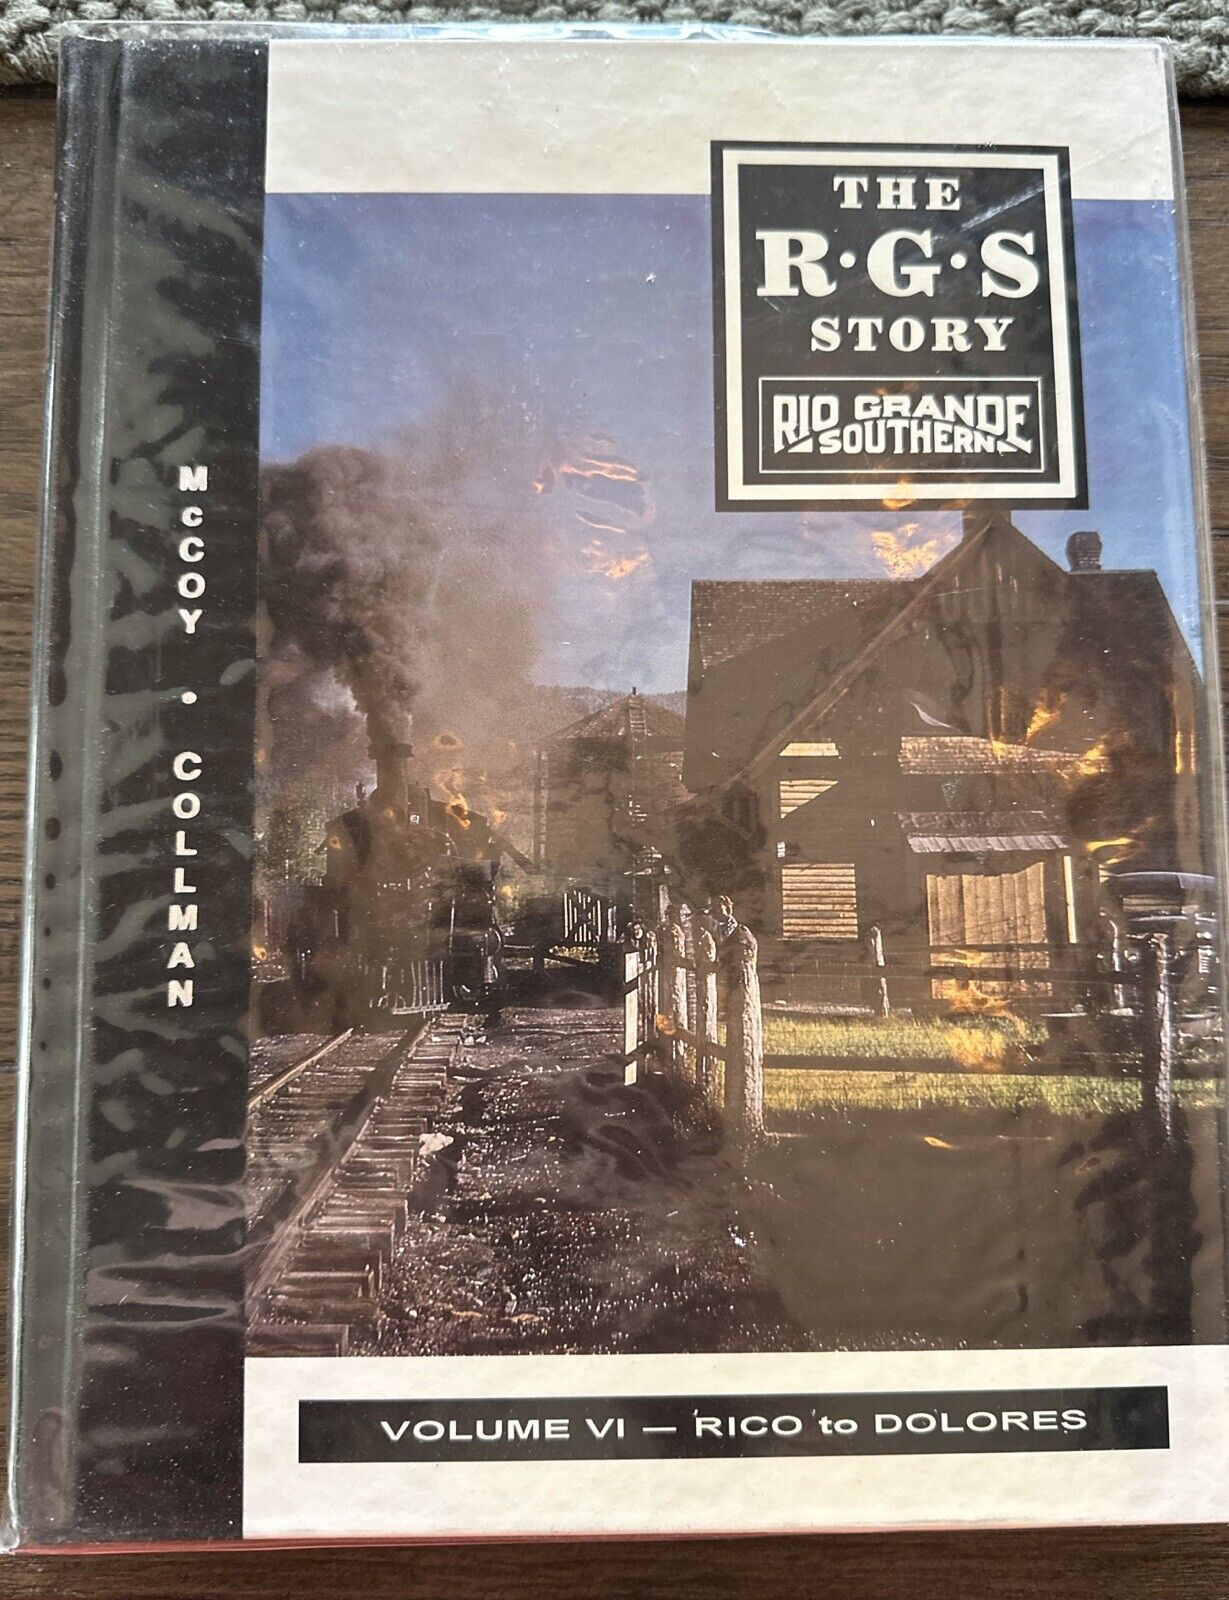 The R G S Story Volume VI Rico to Dolores by McCoy & Collman HC with Dust Jacket